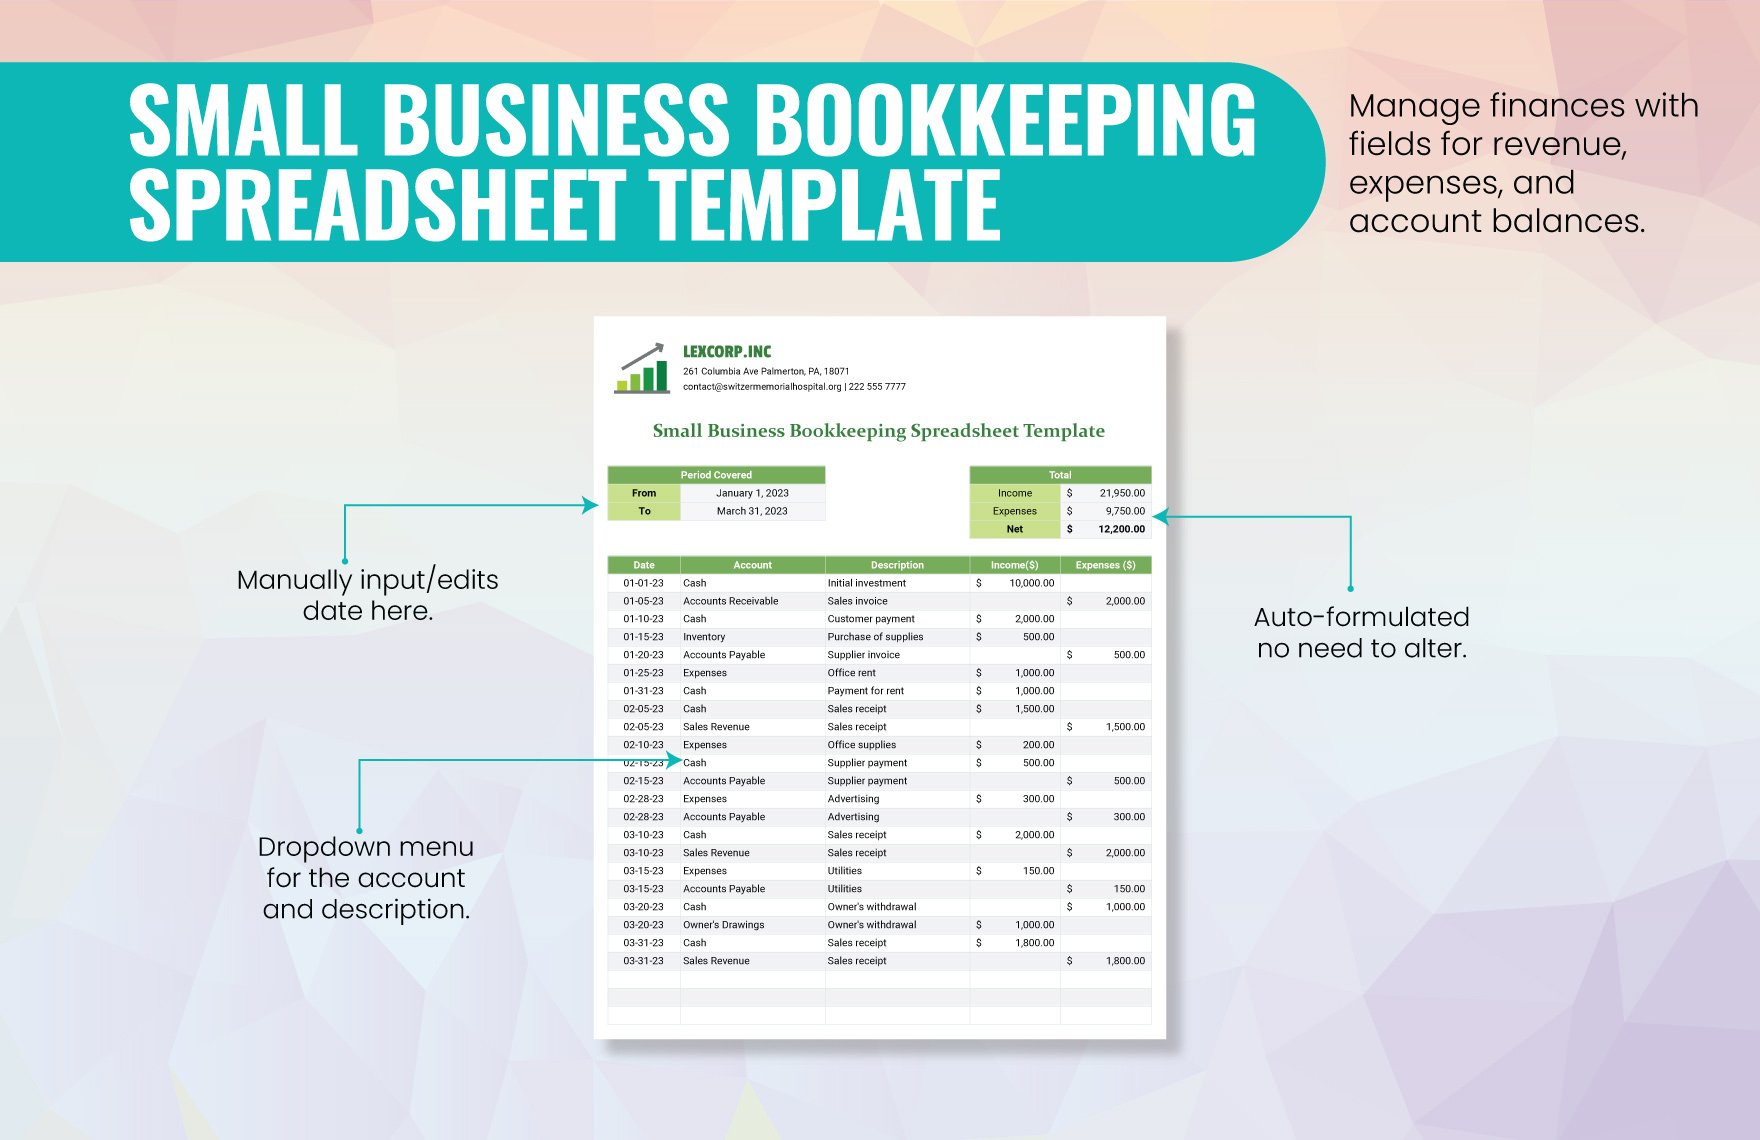 Small Business Bookkeeping Spreadsheet Template